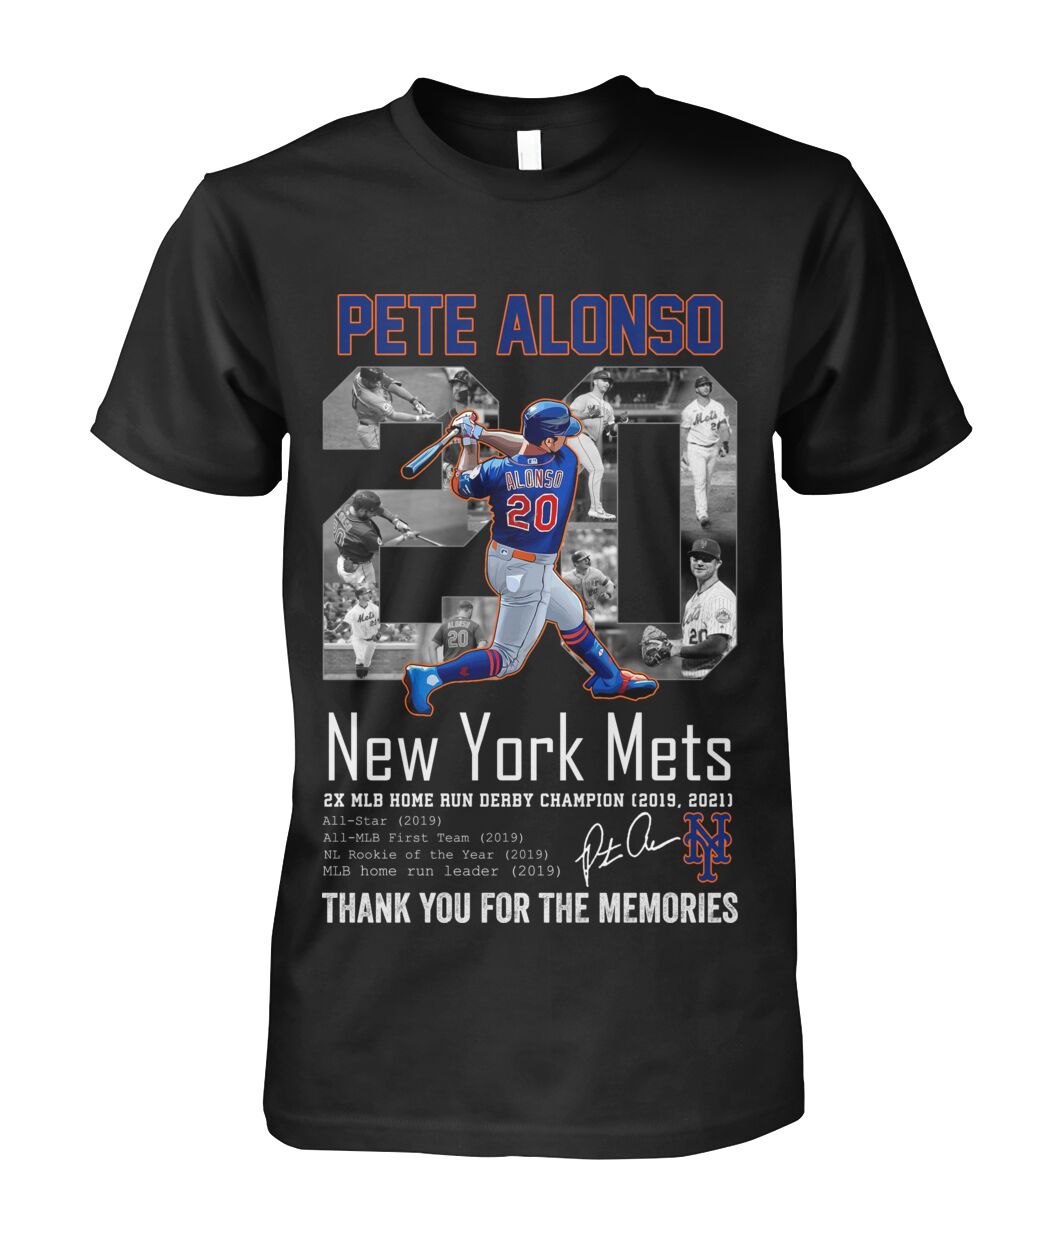 Pete alonso 20 new york mets thank you for the memories shirt 12